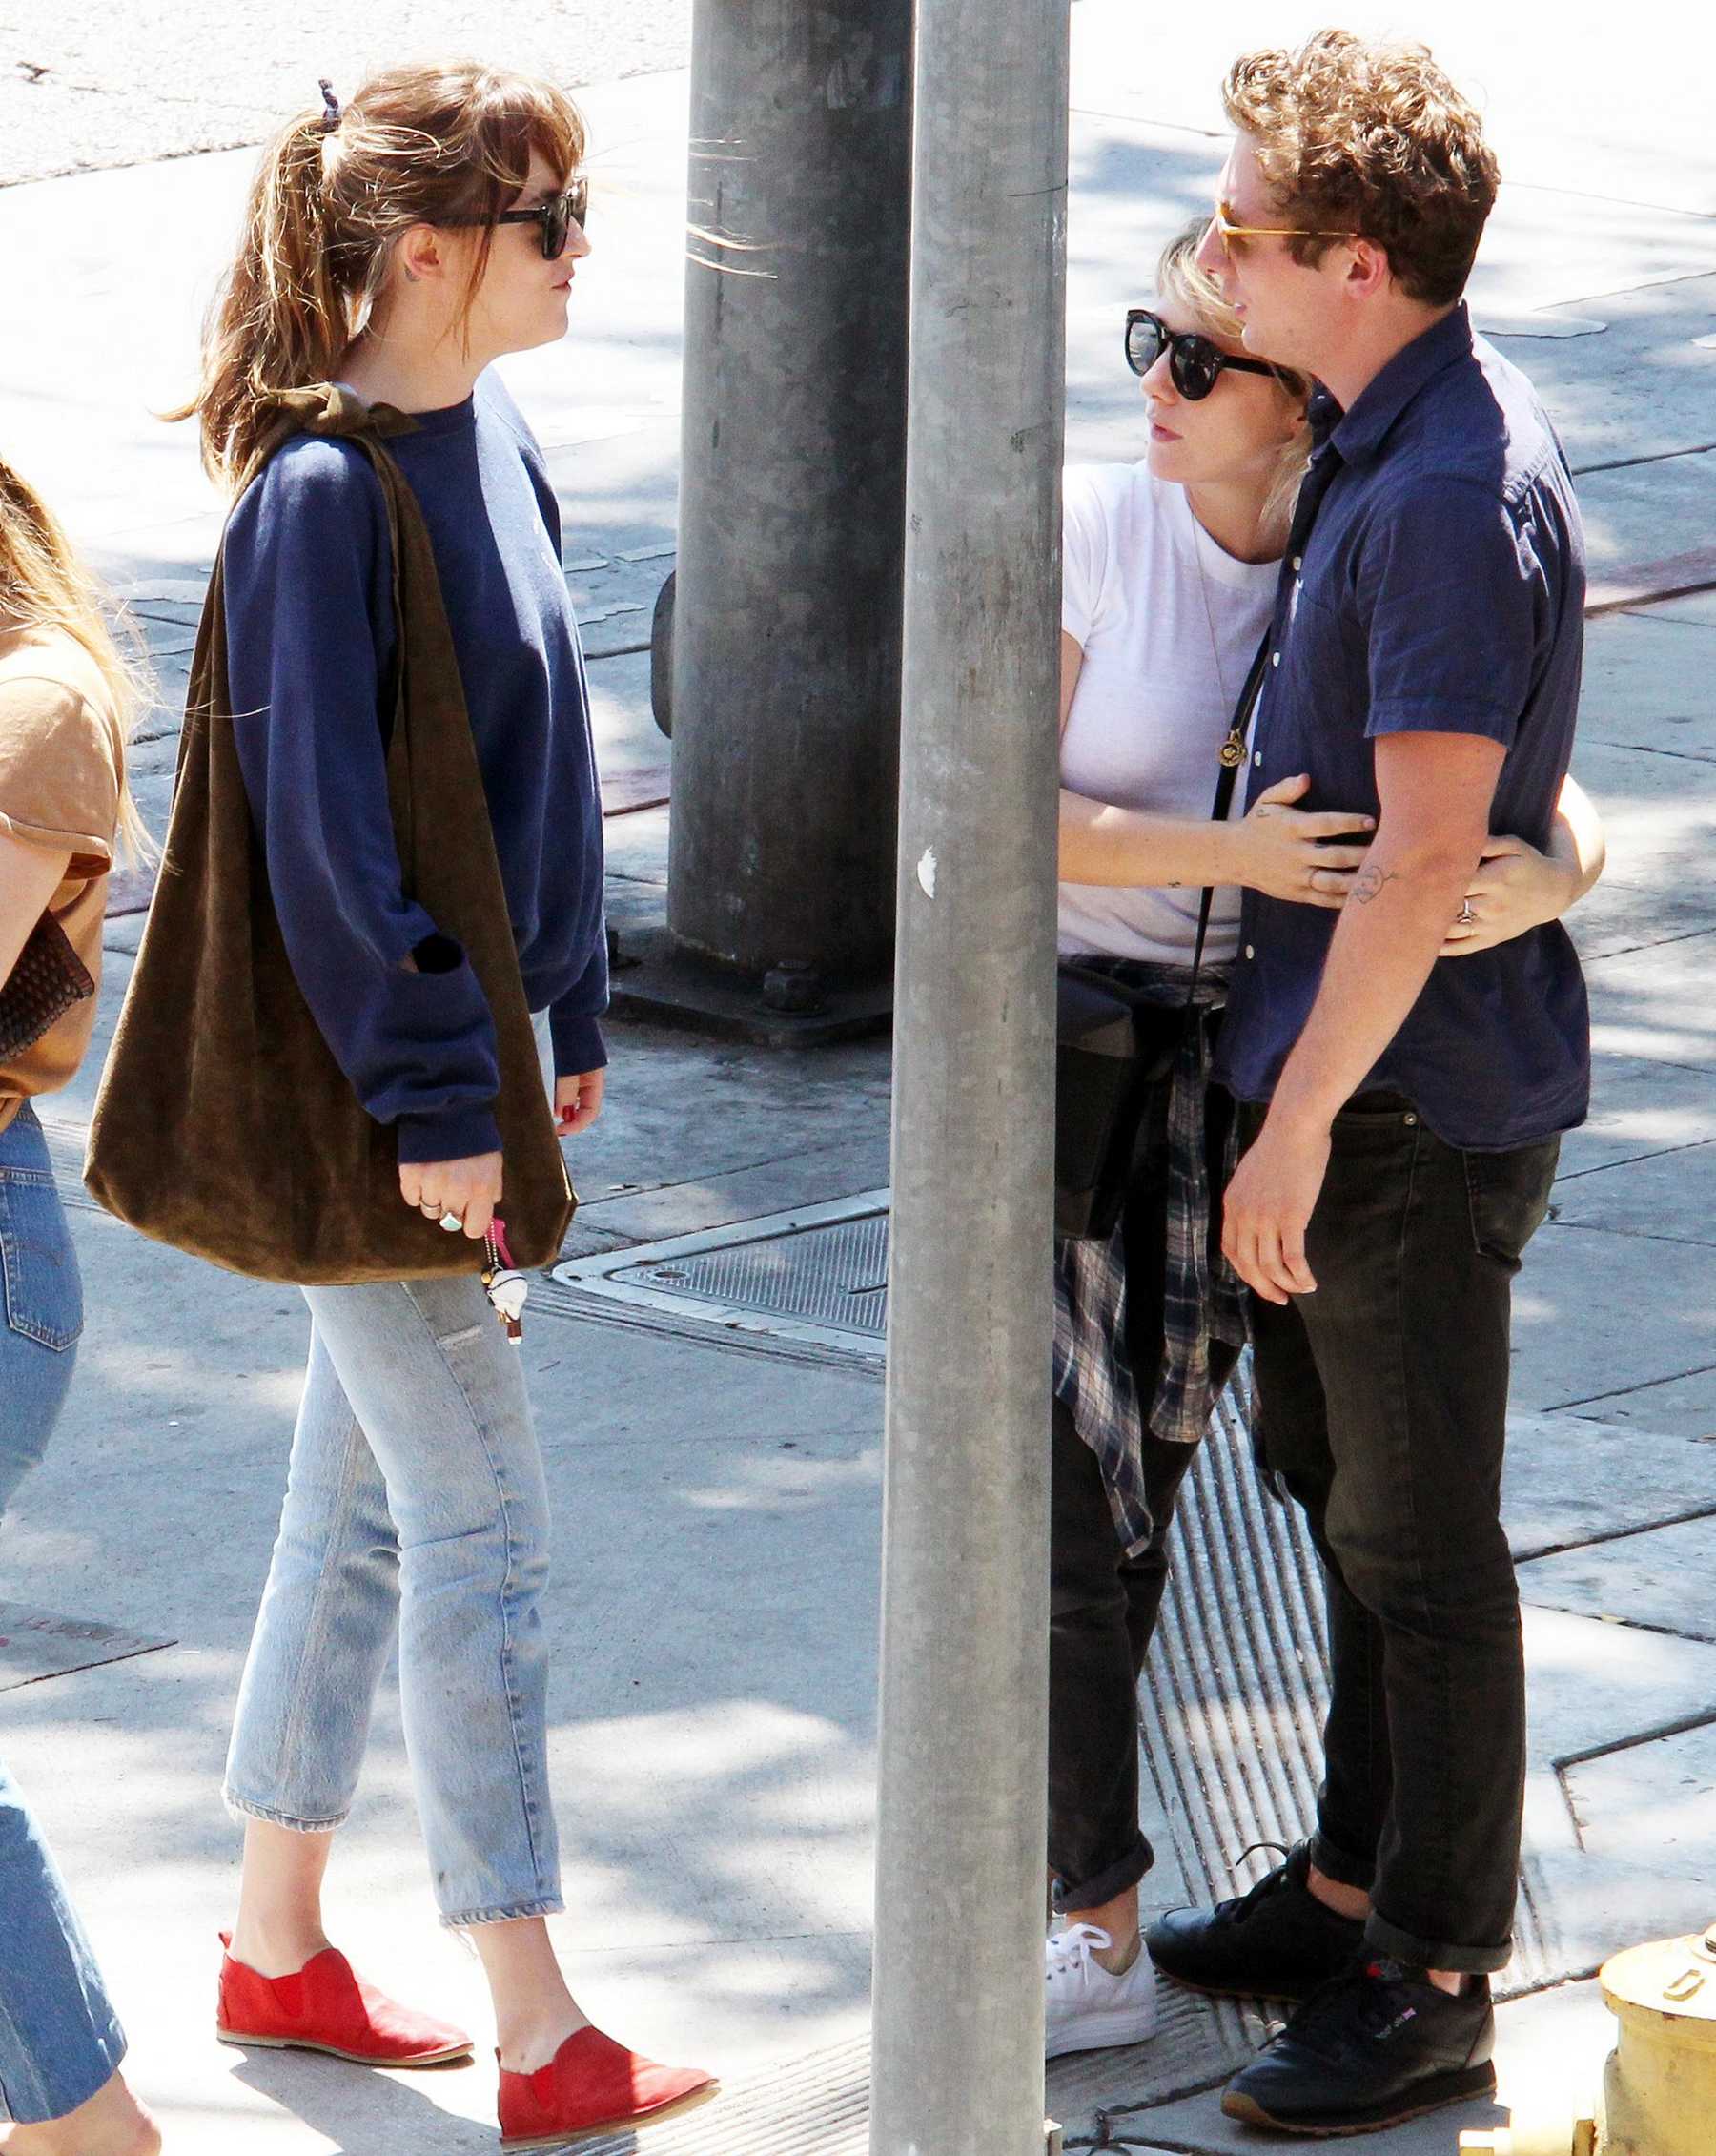 Dakota_Johnson_-_Goes_for_lunch_and_shopping_in_Los_Angeles_on_August_22-10.jpg